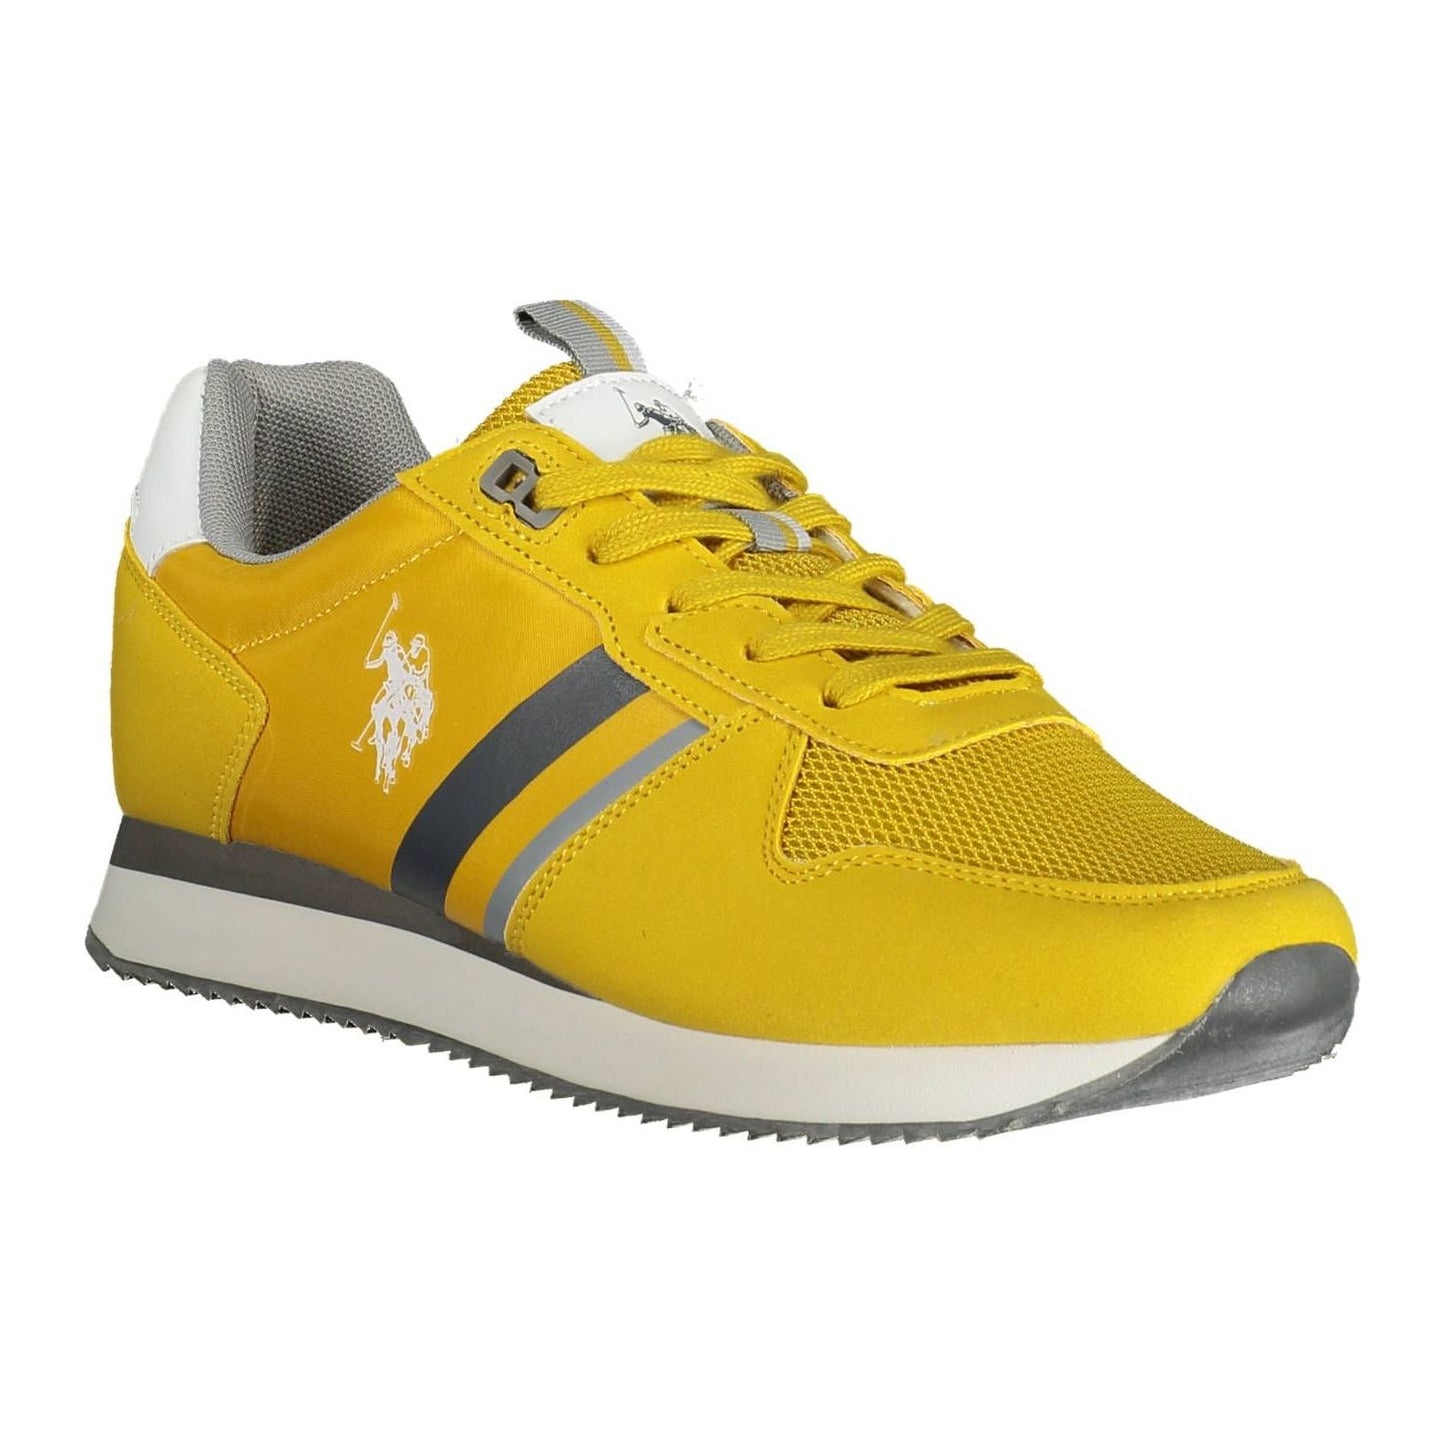 U.S. POLO ASSN. Radiant Yellow Sports Sneakers with Contrasting Details radiant-yellow-sports-sneakers-with-contrasting-details